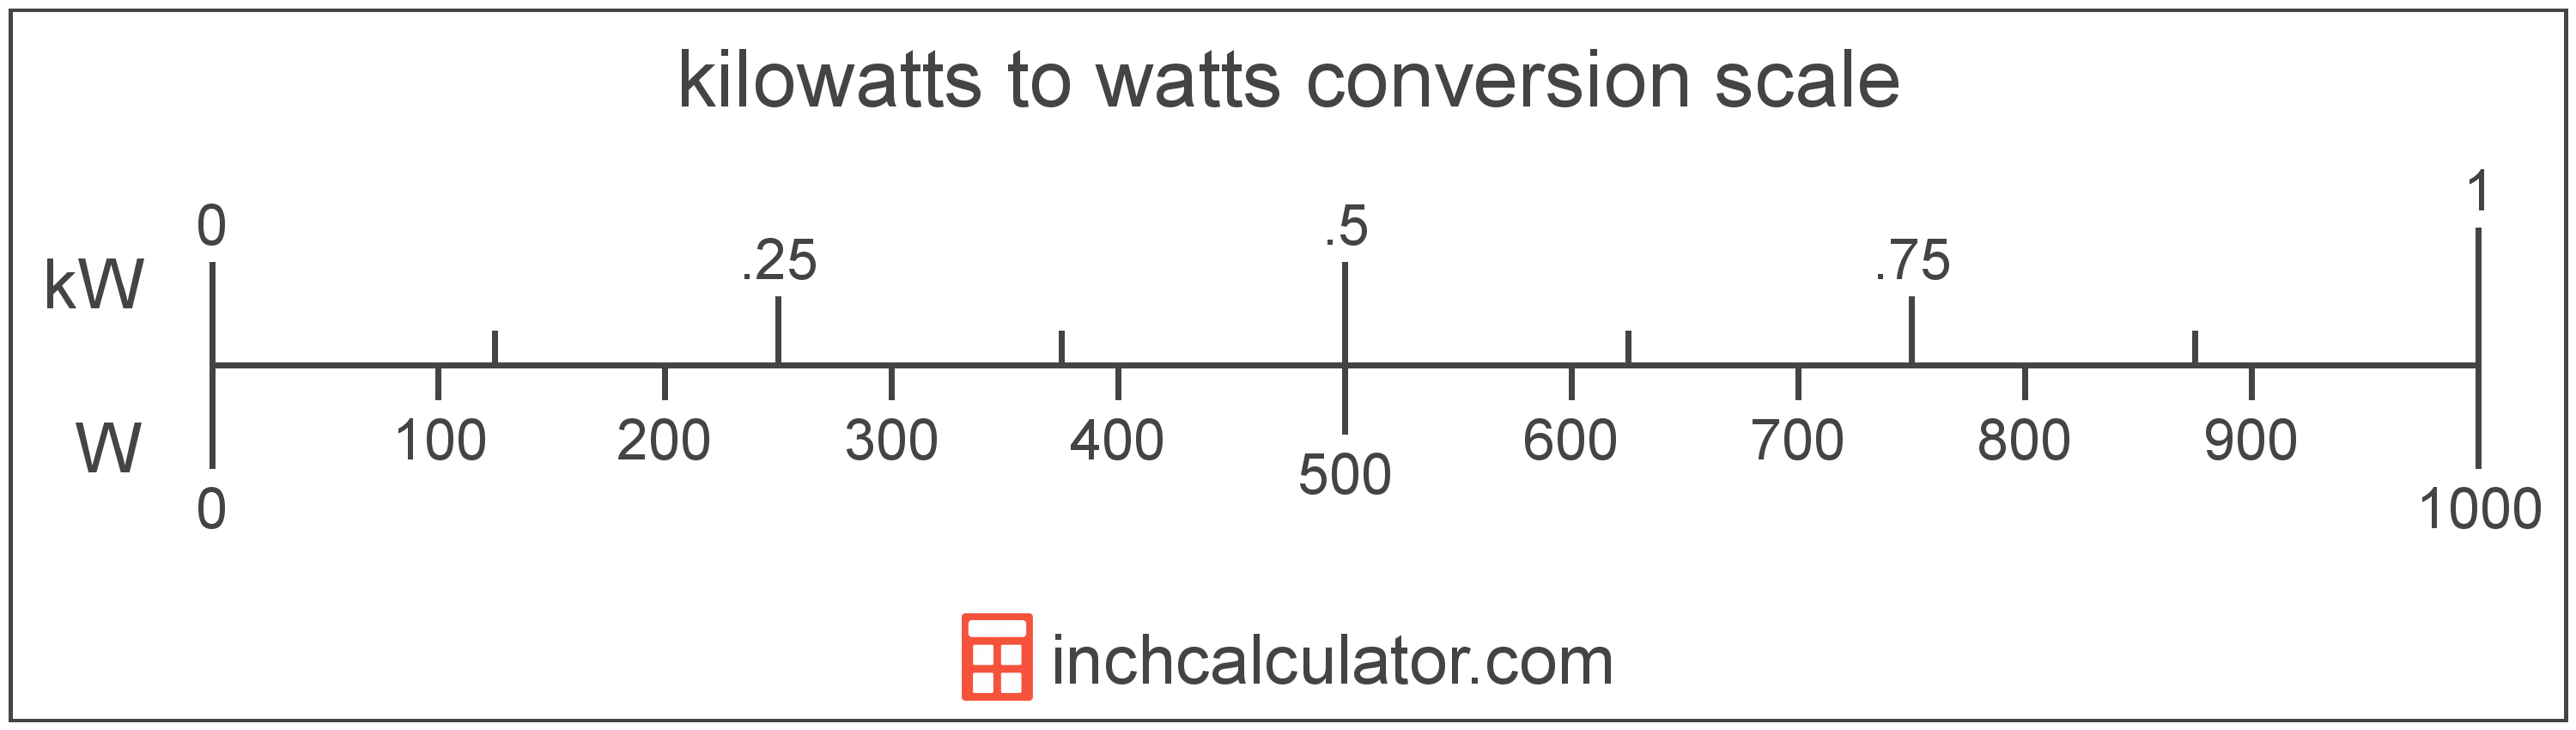 conversion scale showing watts and equivalent kilowatts power values